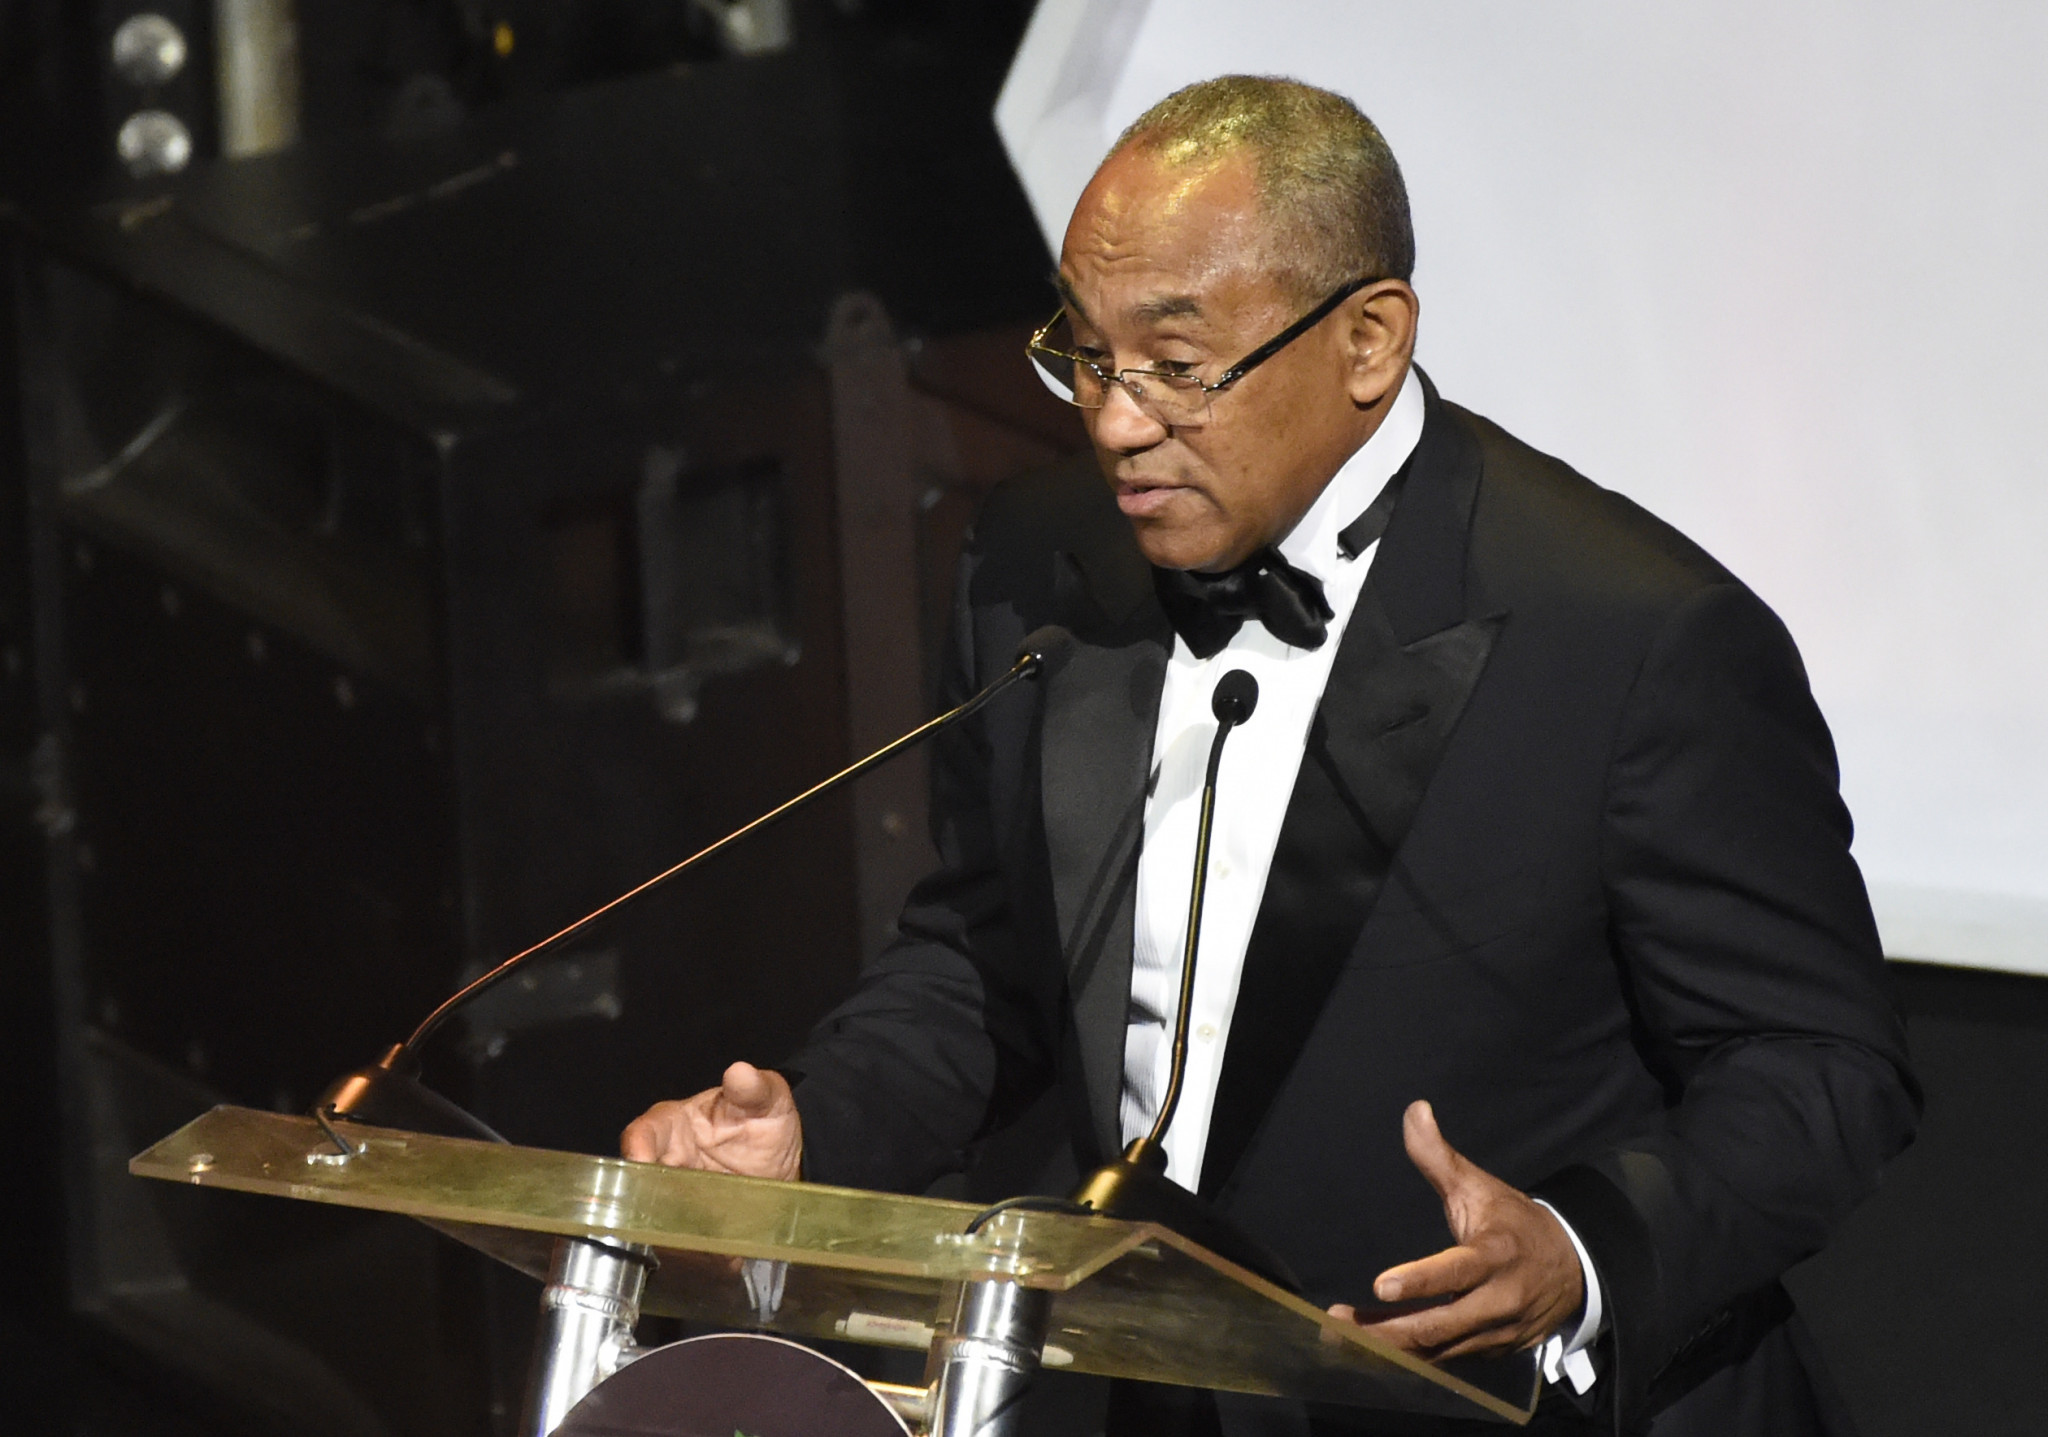 CAF President reiterates support for Morocco hosting 2026 FIFA World Cup